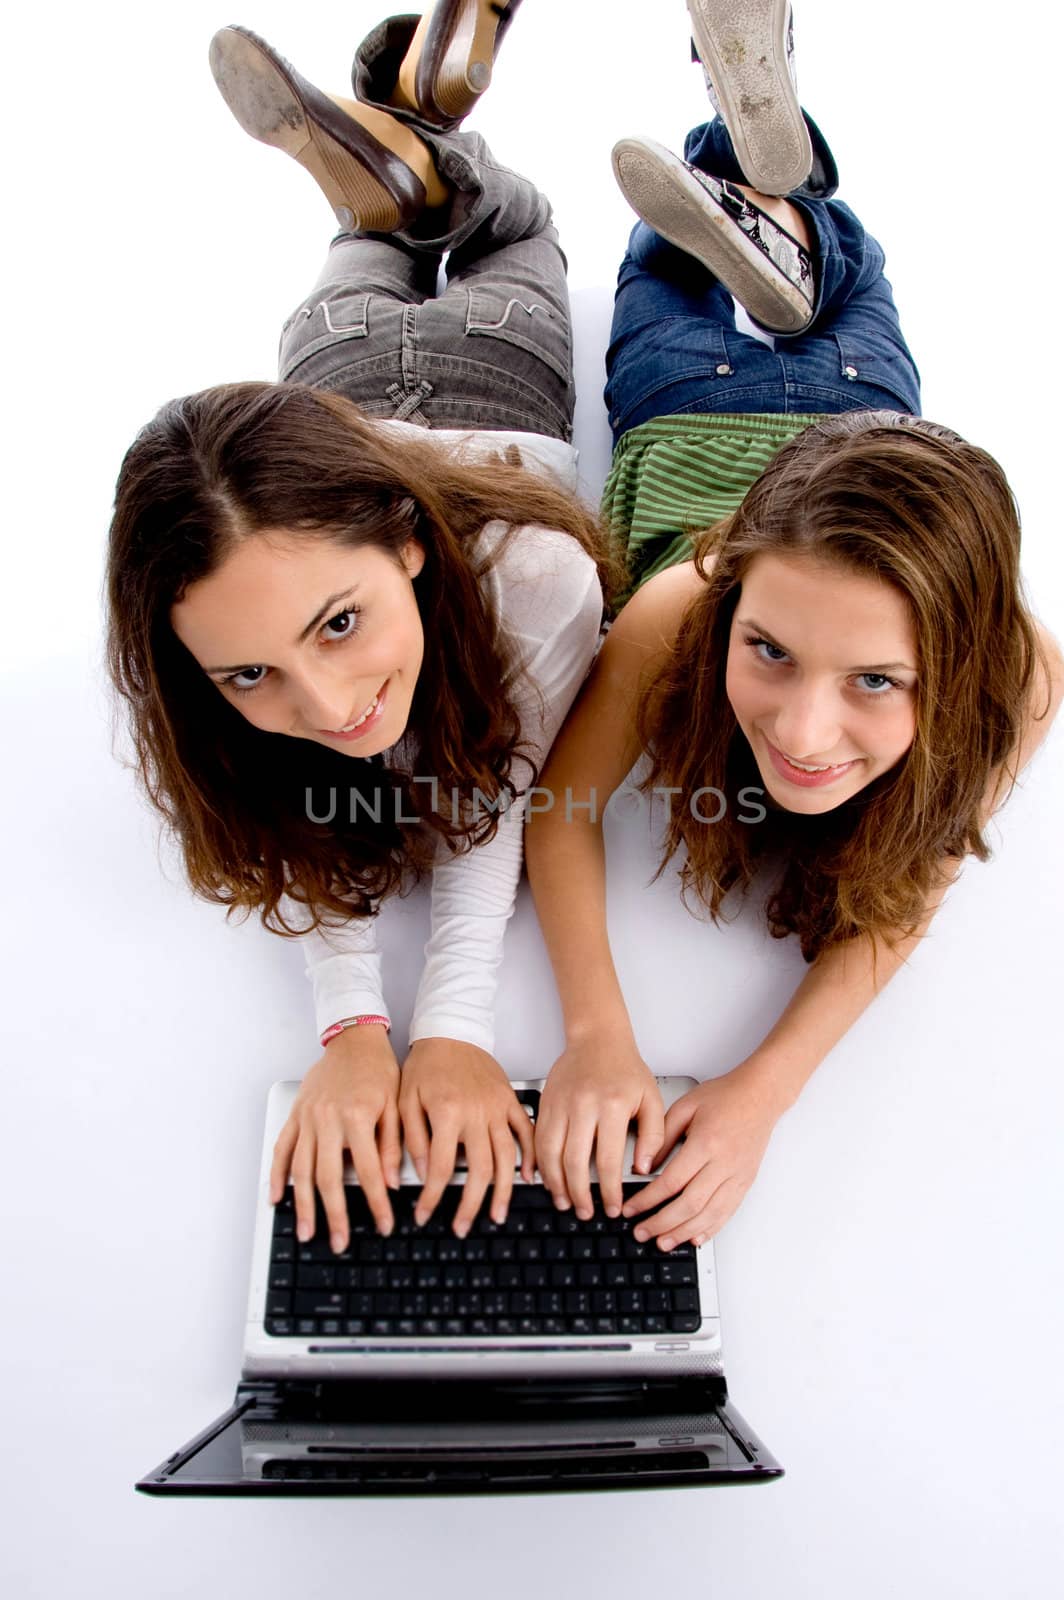 cute teenager girls busy on laptop by imagerymajestic